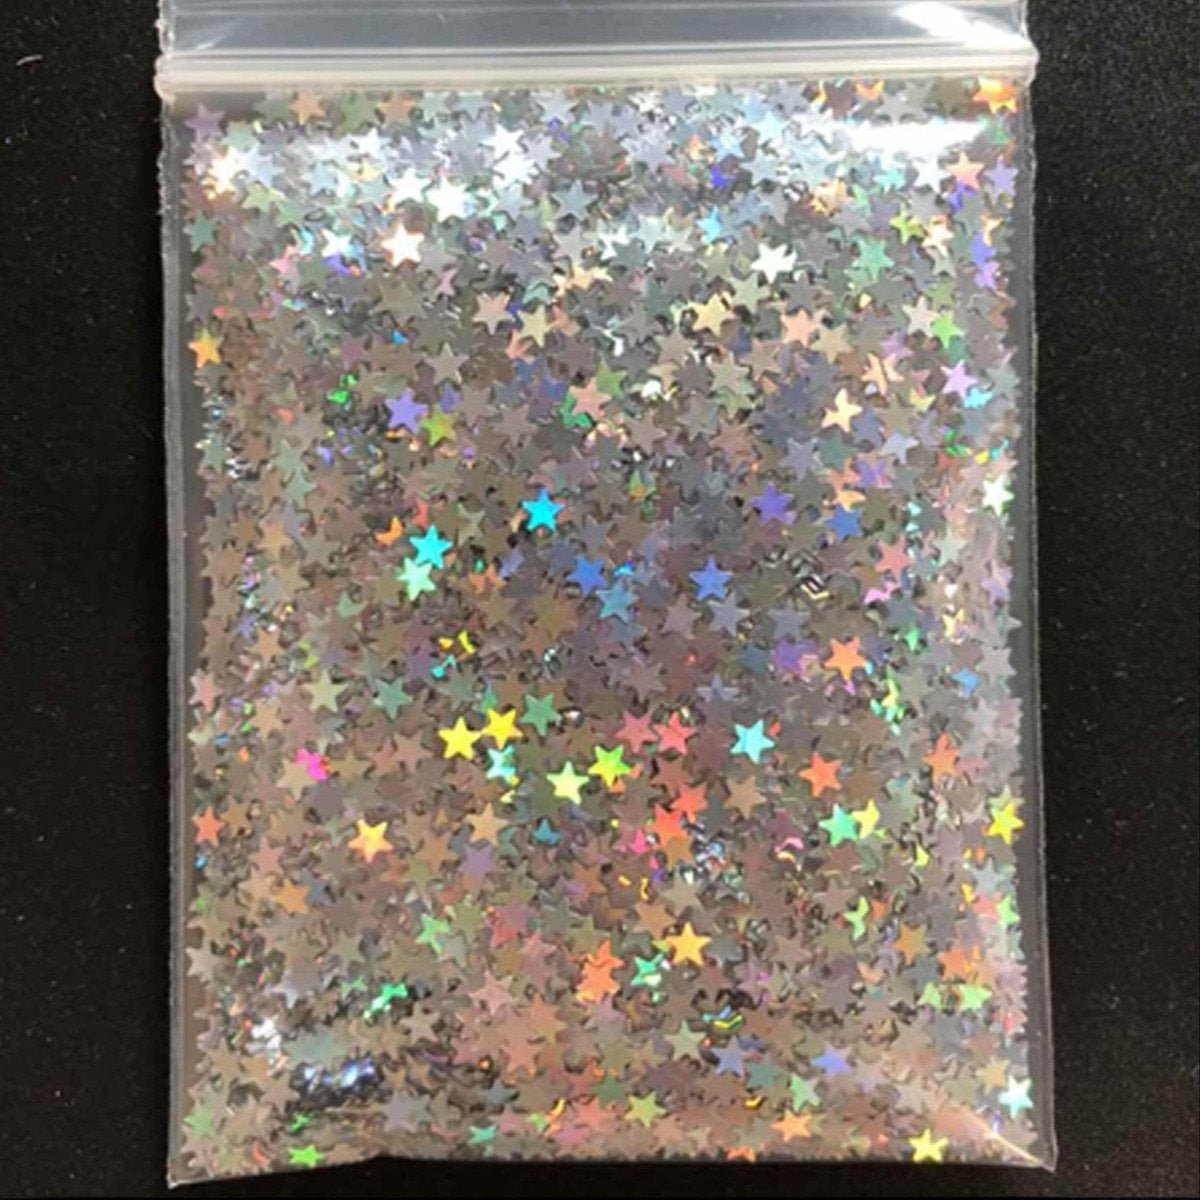 10g Holographic Nail Art Decals Silver Gold Stars Butterflies Bling Decorations - Silver Stars - - Asia Sell